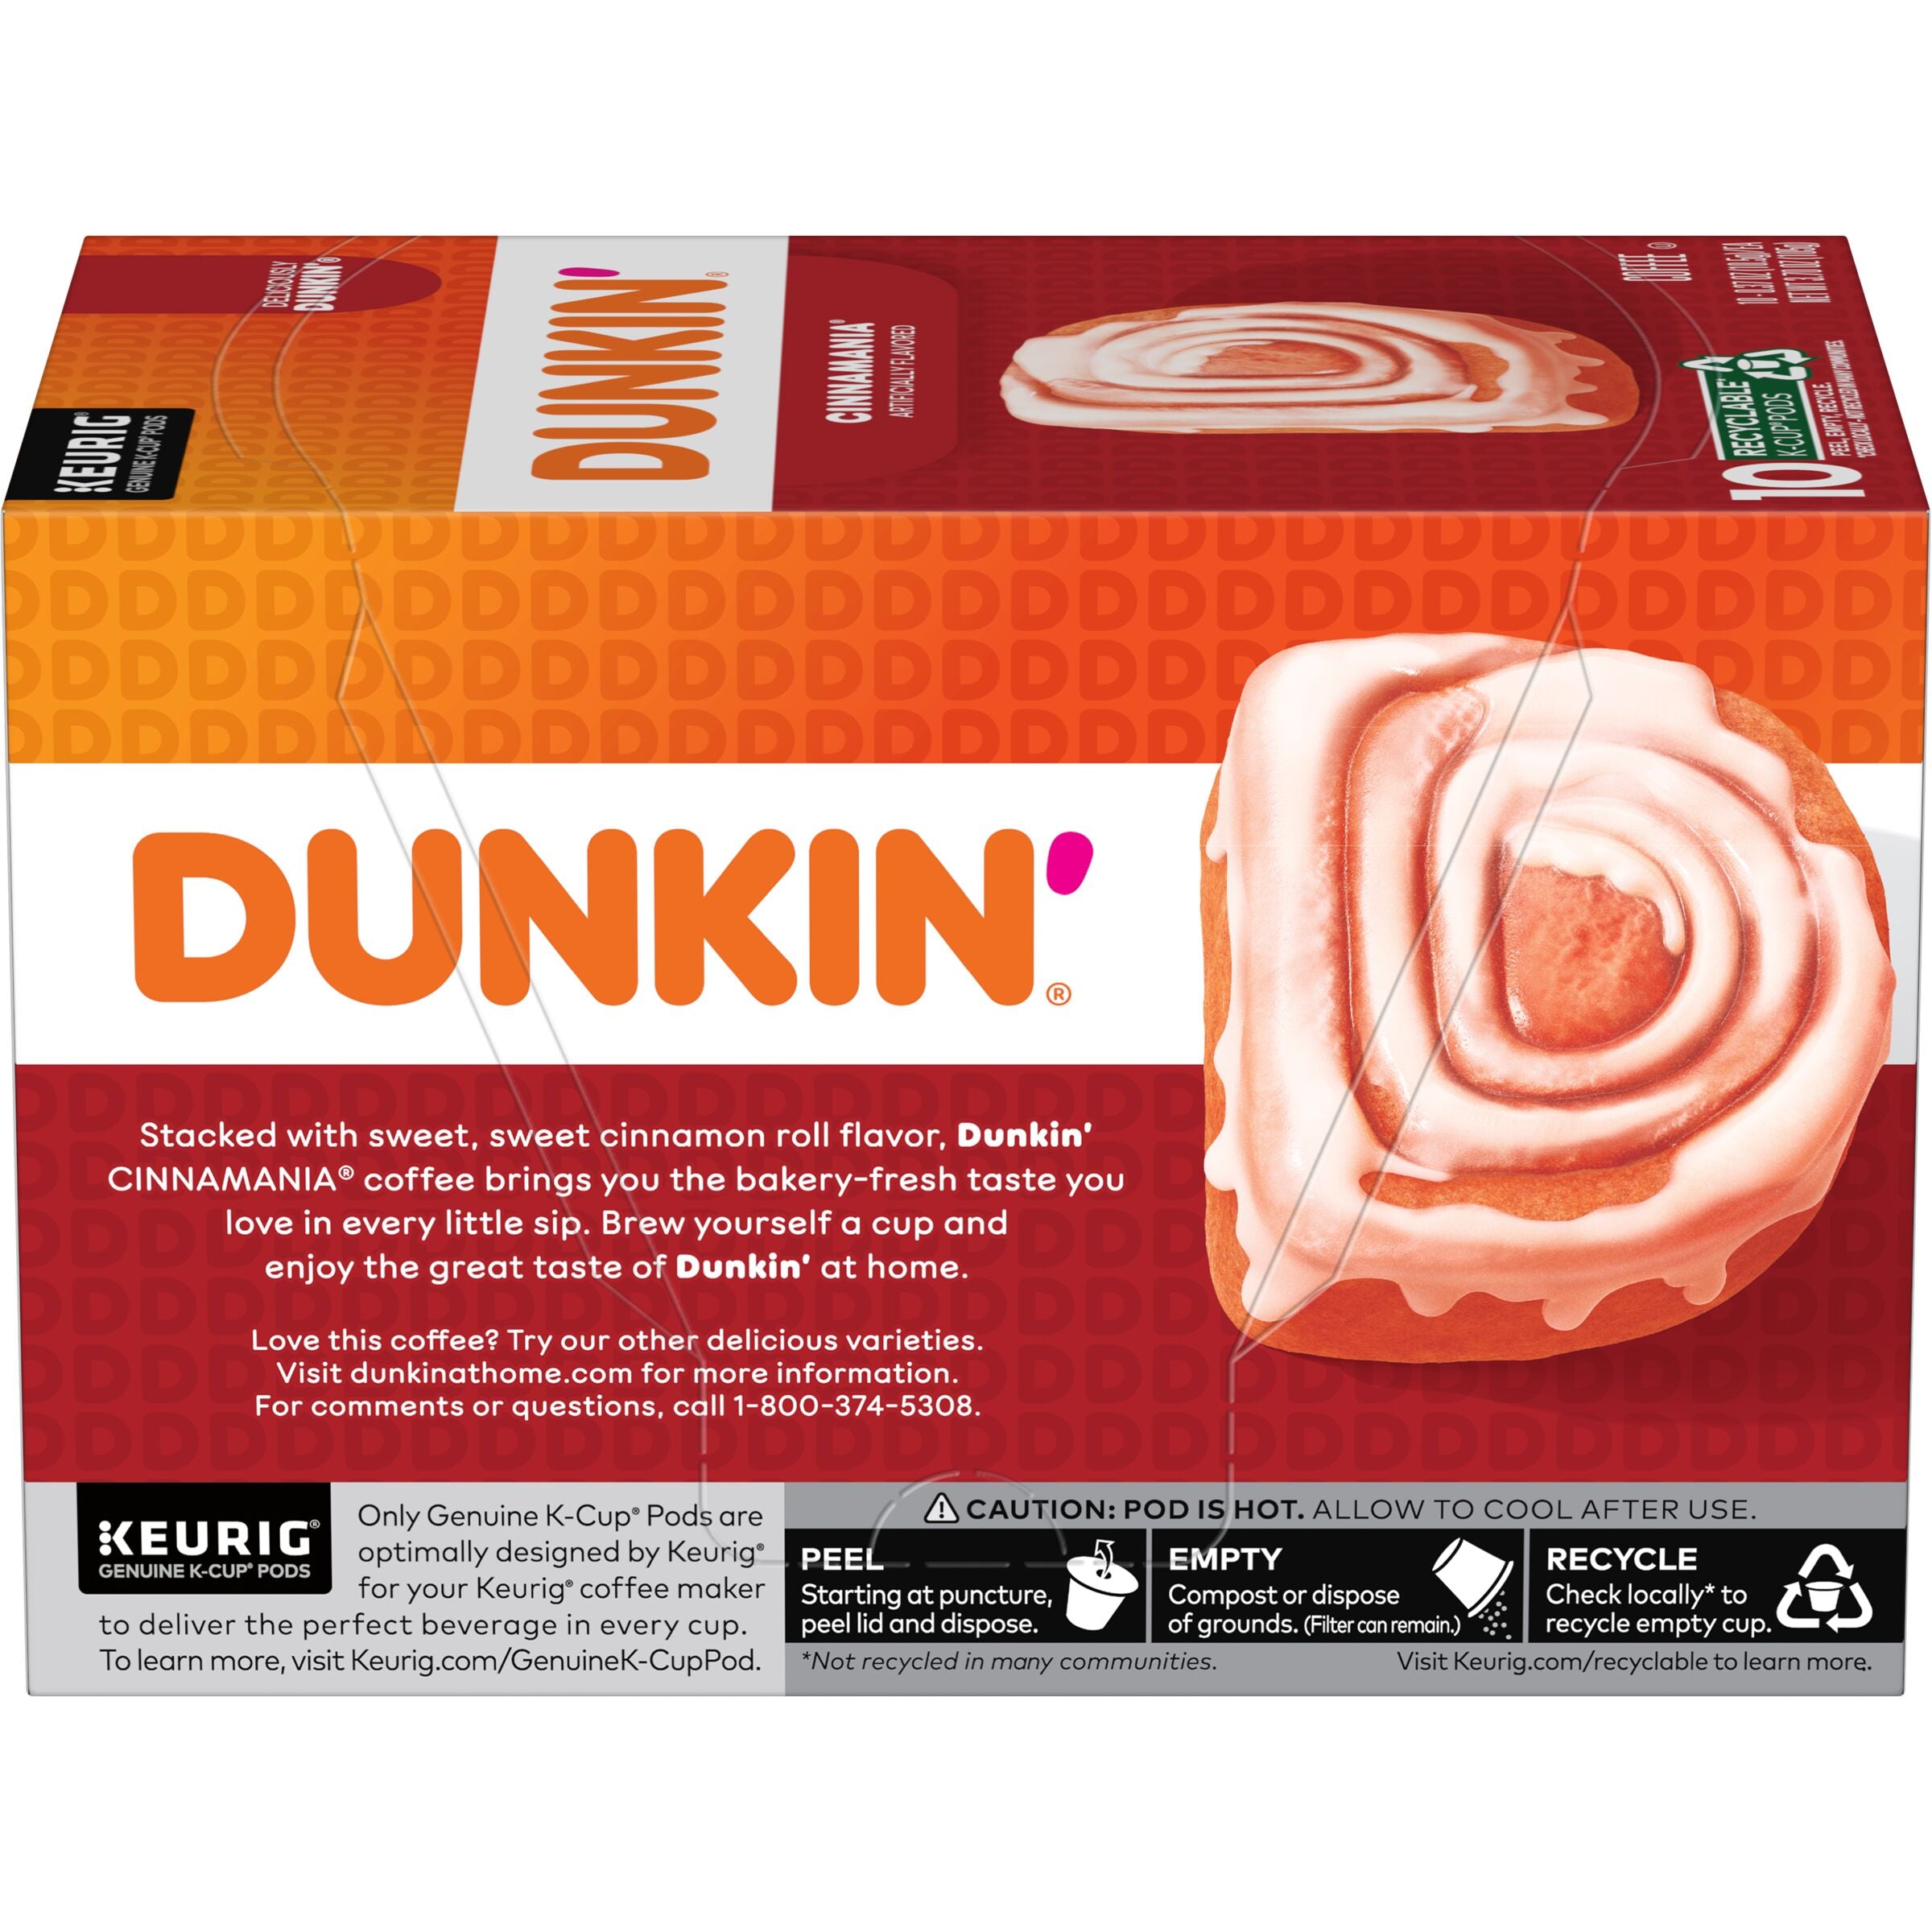 Dunkin' Cinnamania Flavored Coffee, K-Cup Pods, 10 Count